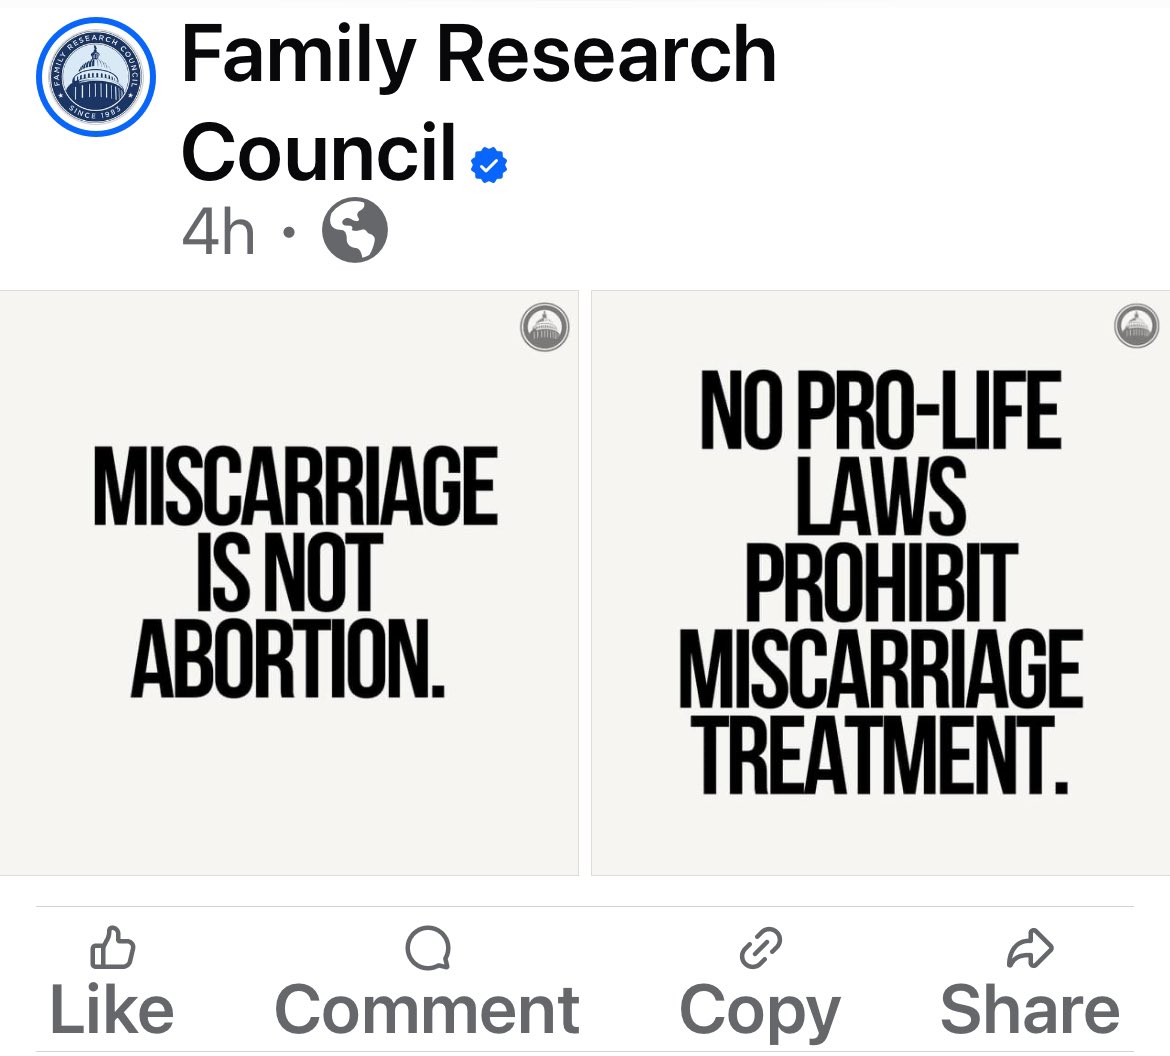 This is a lie and they know it. @FRCdc